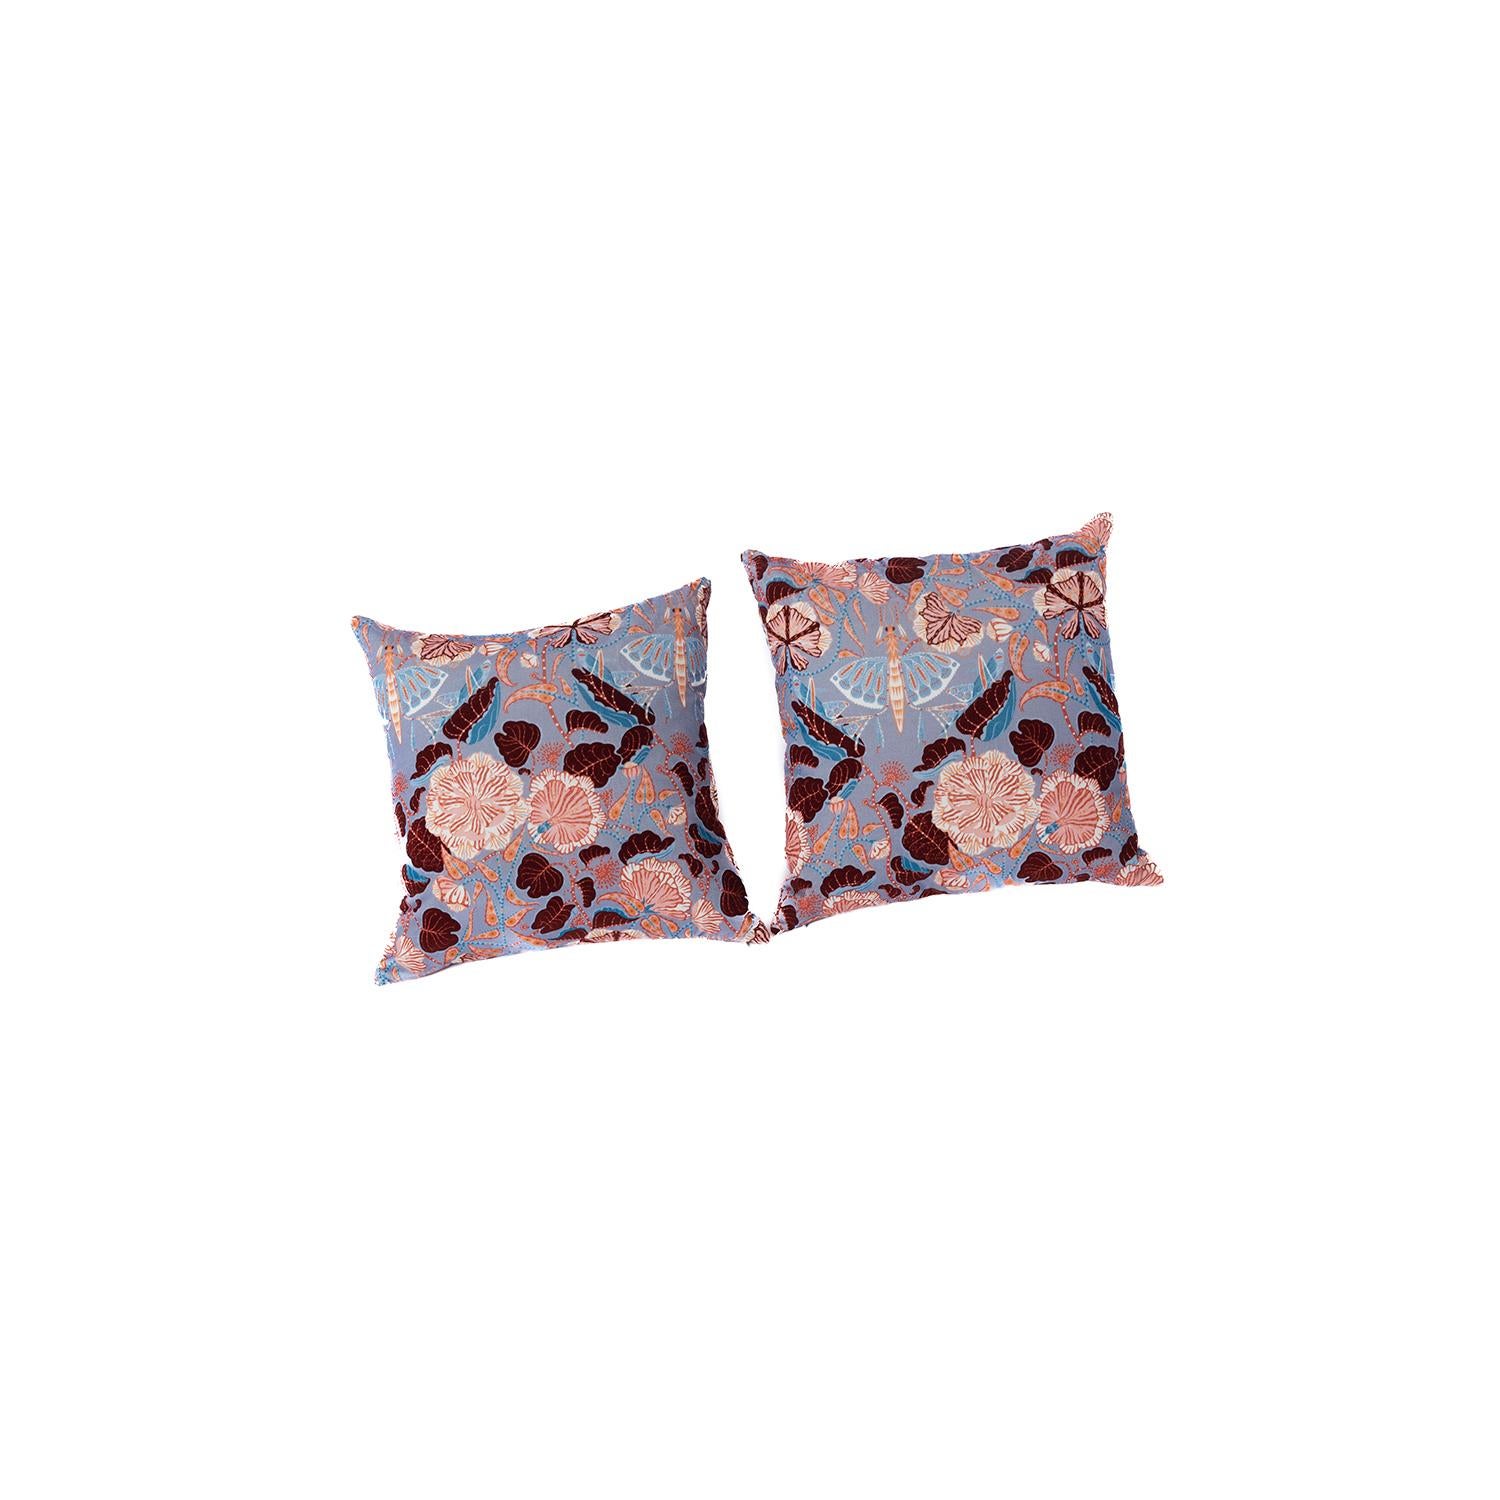 Down filled velvet pillows in a Grasshopper print by Klaus Haapaniemi, designed and produced by Danish Teak Classics. This textile design is a lovely modern - surrealist print that features morning glories, peonies and fantastical flora interspersed